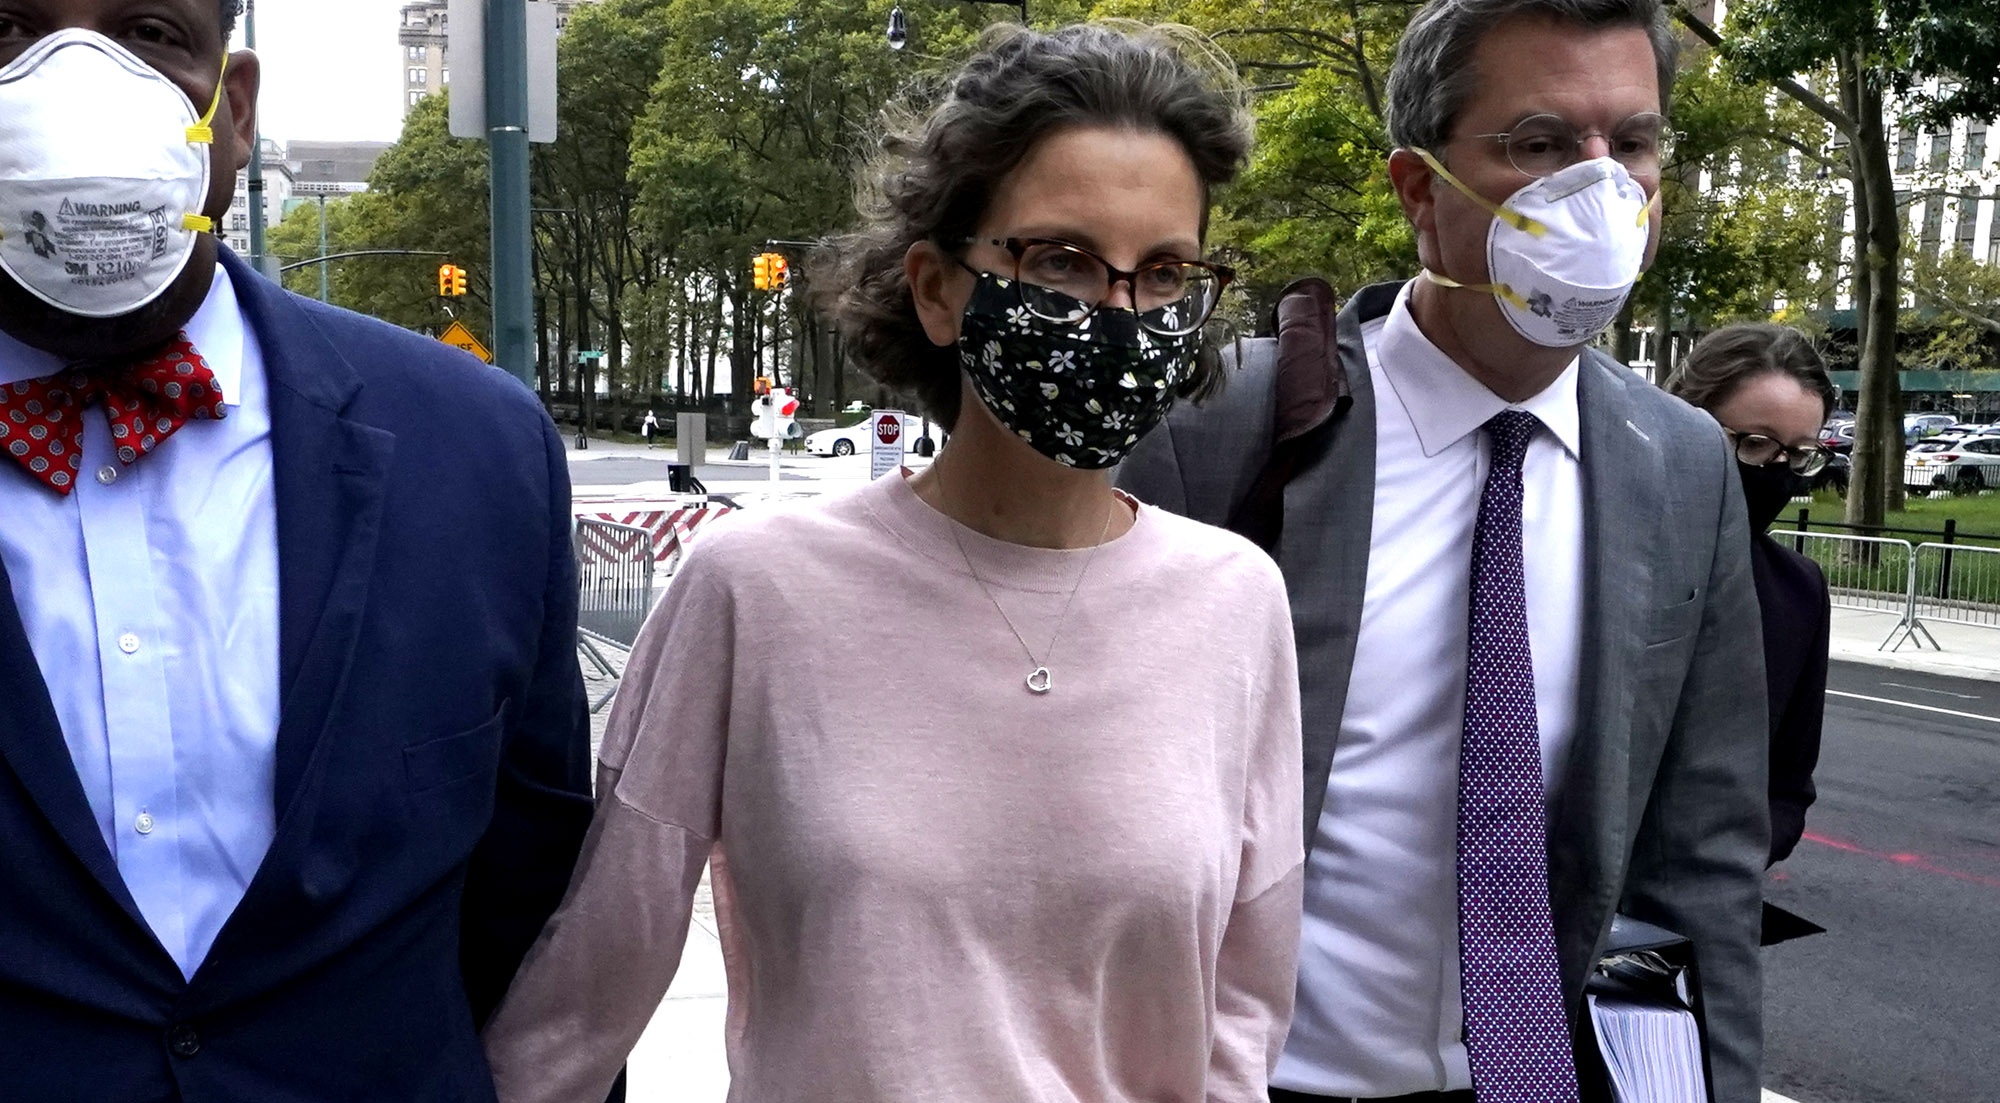 Seagrams Heiress Sentenced To 81 Months In Prison For Her Role In Nxivm Sex Slave Cult Brobible 2609